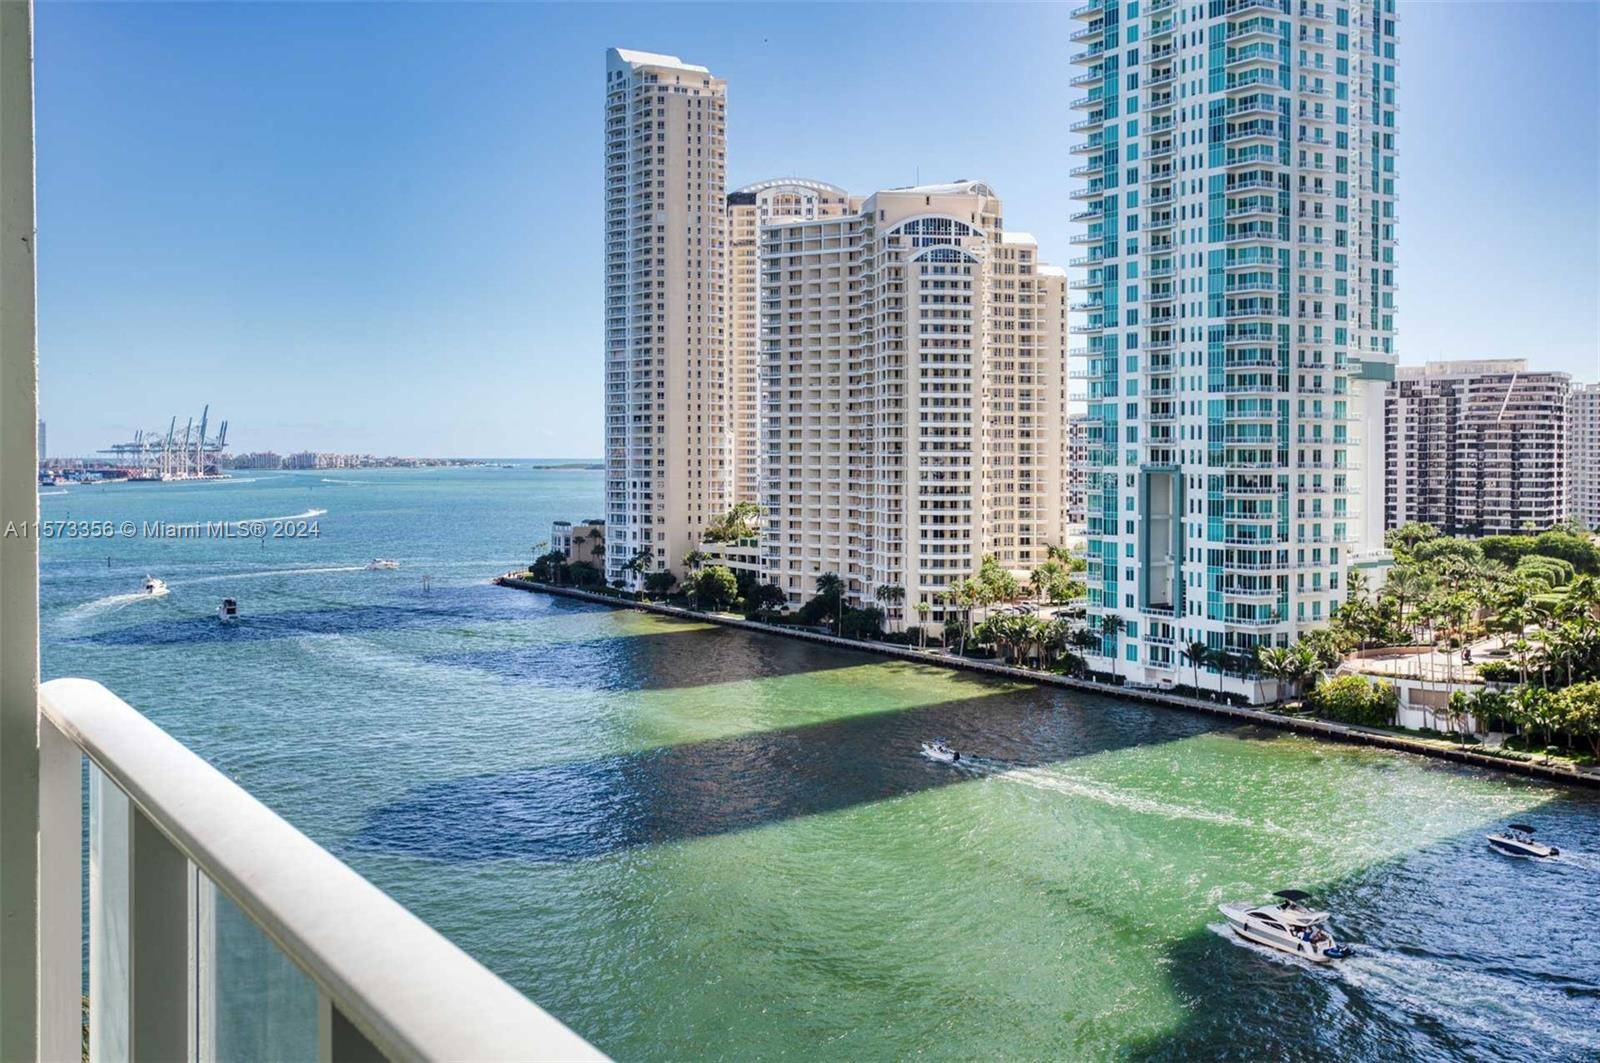 Located in the heart of Downtown Miami, the loft style one bedroom plus den, one and a half bath apartment boasts stunning views of Biscayne Bay and the Miami River ...